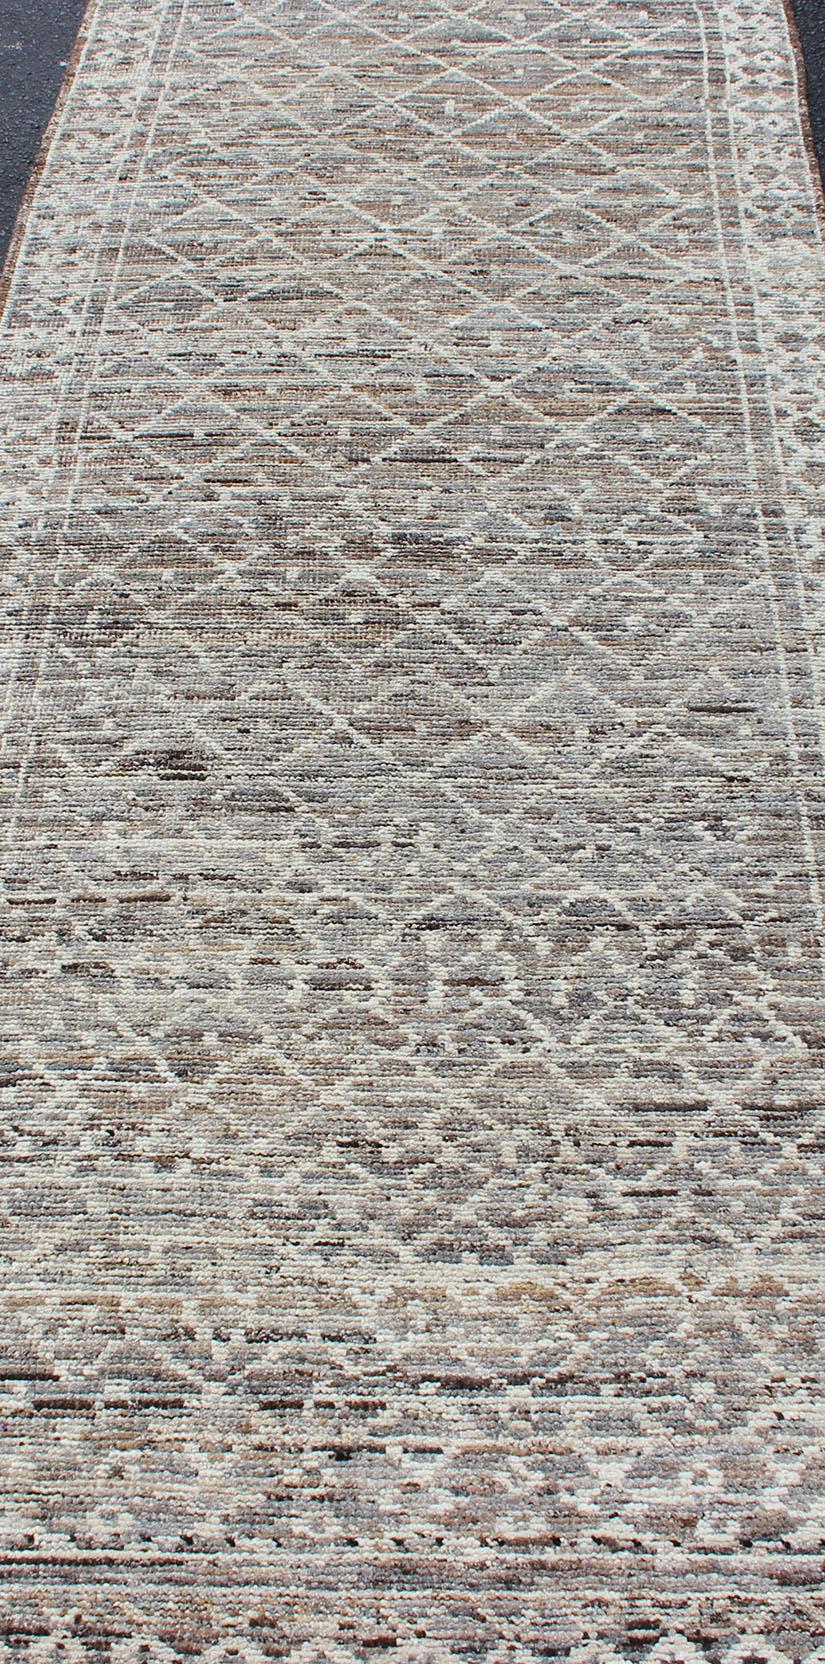 Modern Rug with Tribal Design in Light Gray, Taupe, Brown and Naturals Colors For Sale 2